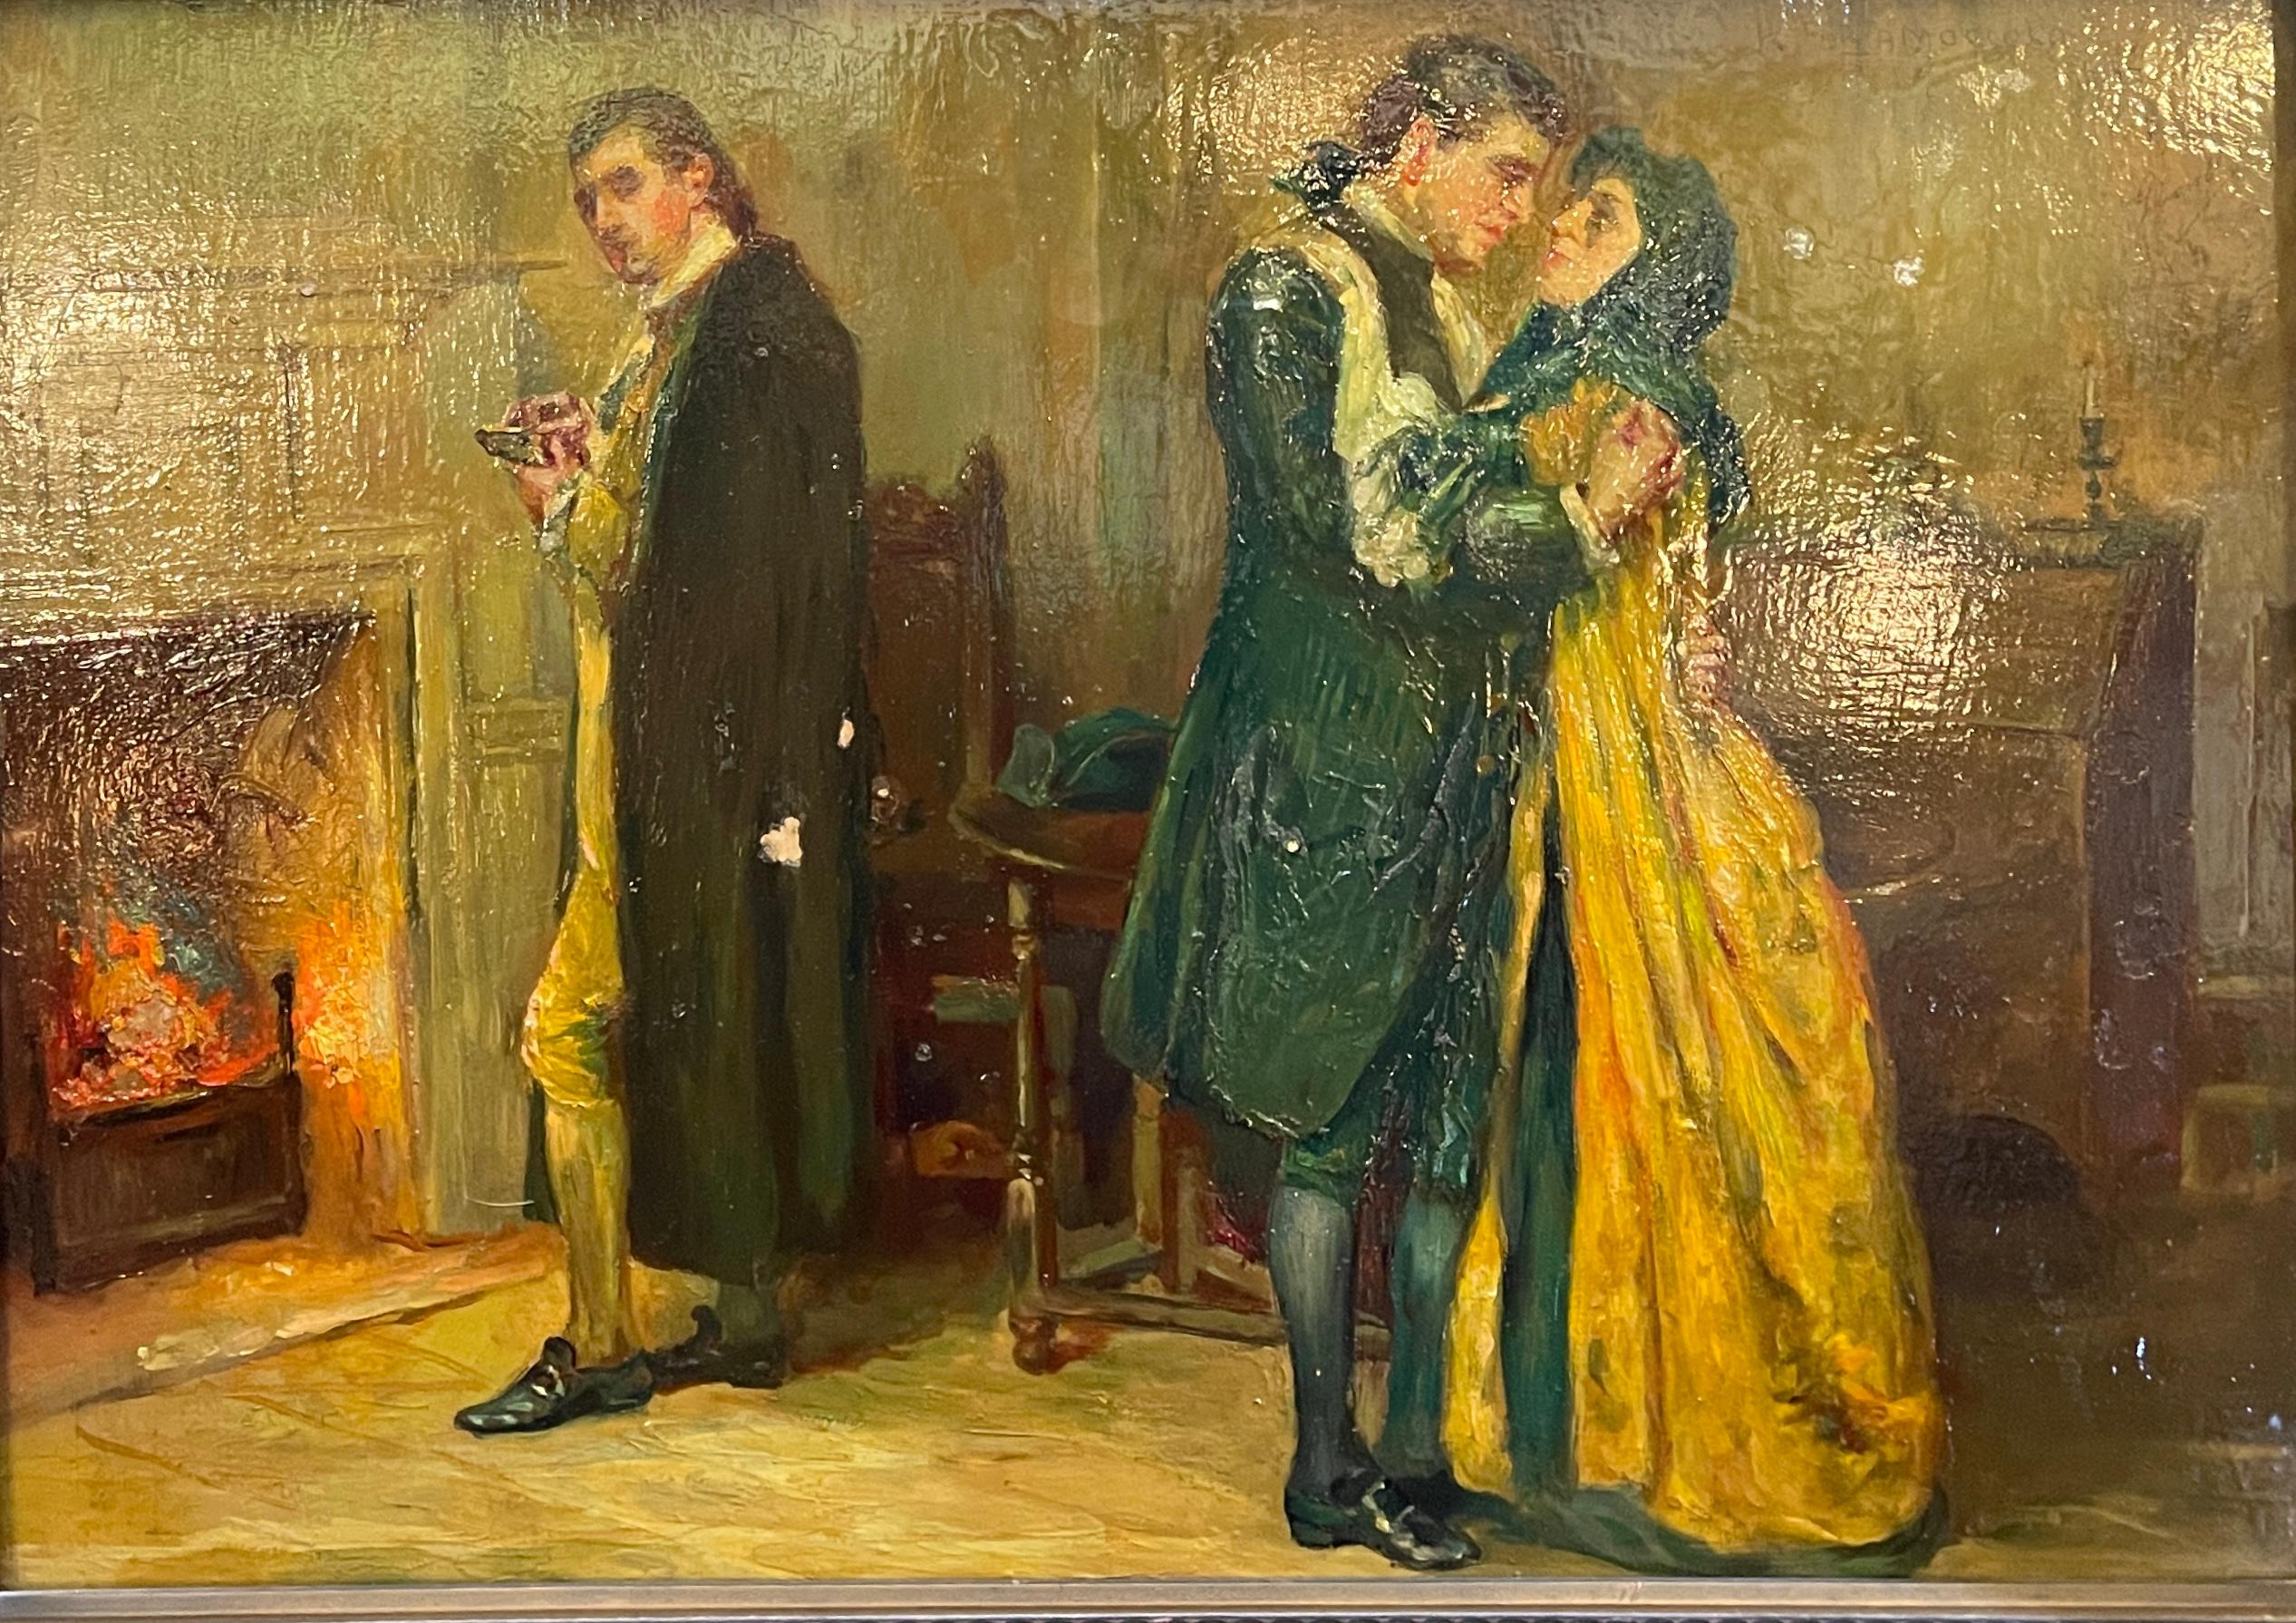 Refined painting, very bright and rich in details, it represents 3 figures in an interior scene, the painting stands out for the use of colors and the brilliant finish.
Signed top right
Good condition, as per photos, some small signs of